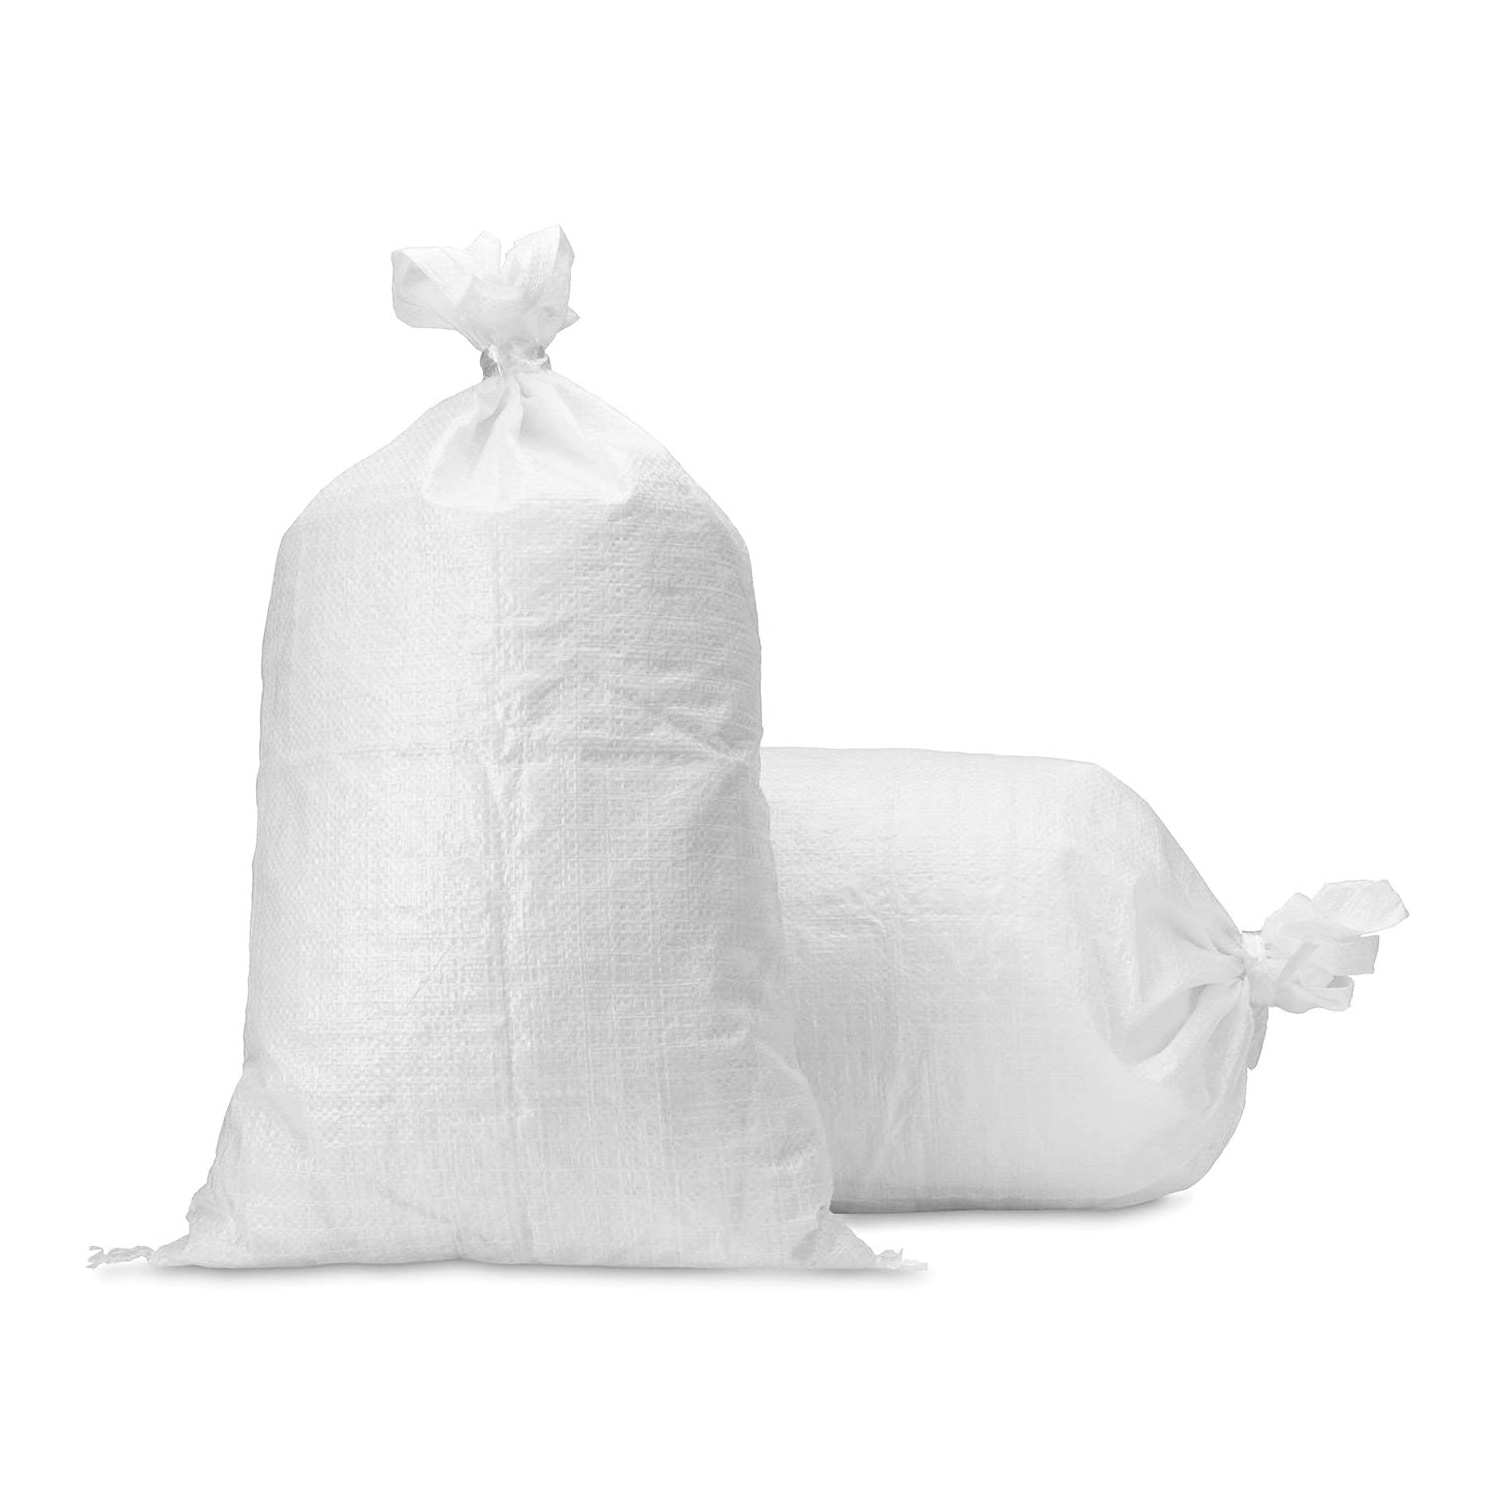 Relarr Sand Bags 14 x 26 Empty White Woven Polypropylene Sandbags Ties Included 10 Pack 